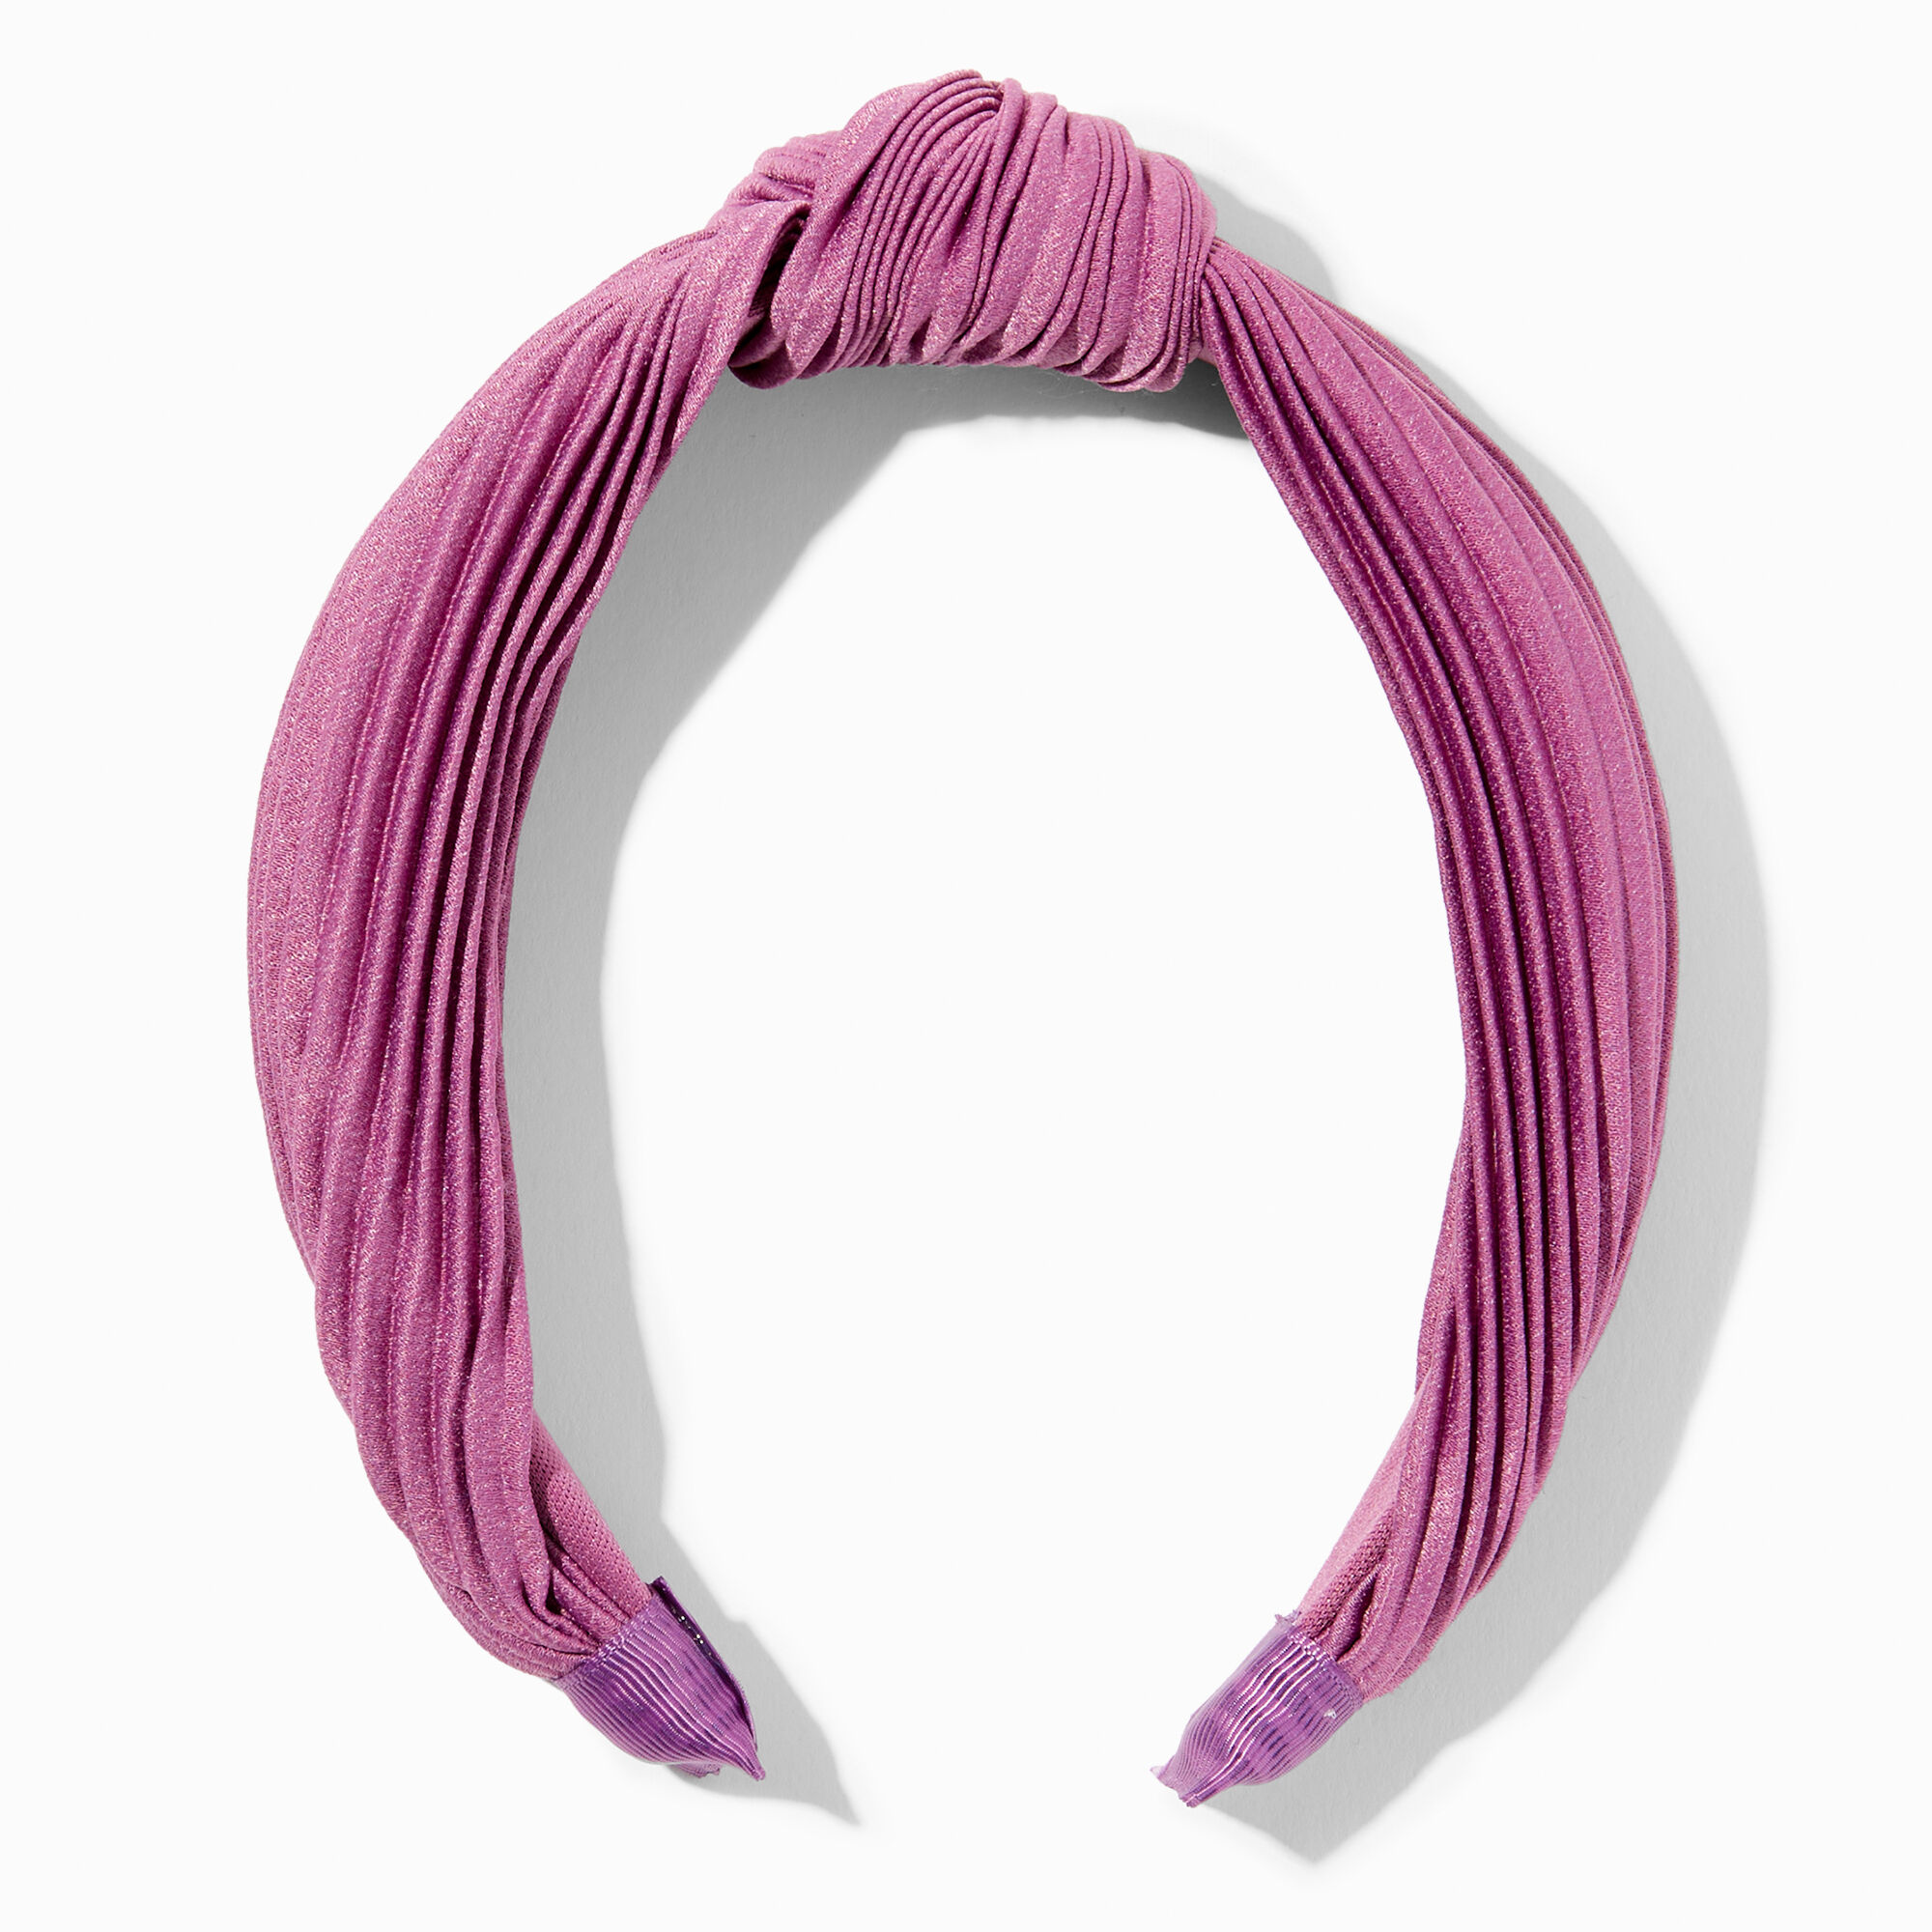 View Claires Lavender Pleated Knotted Headband information